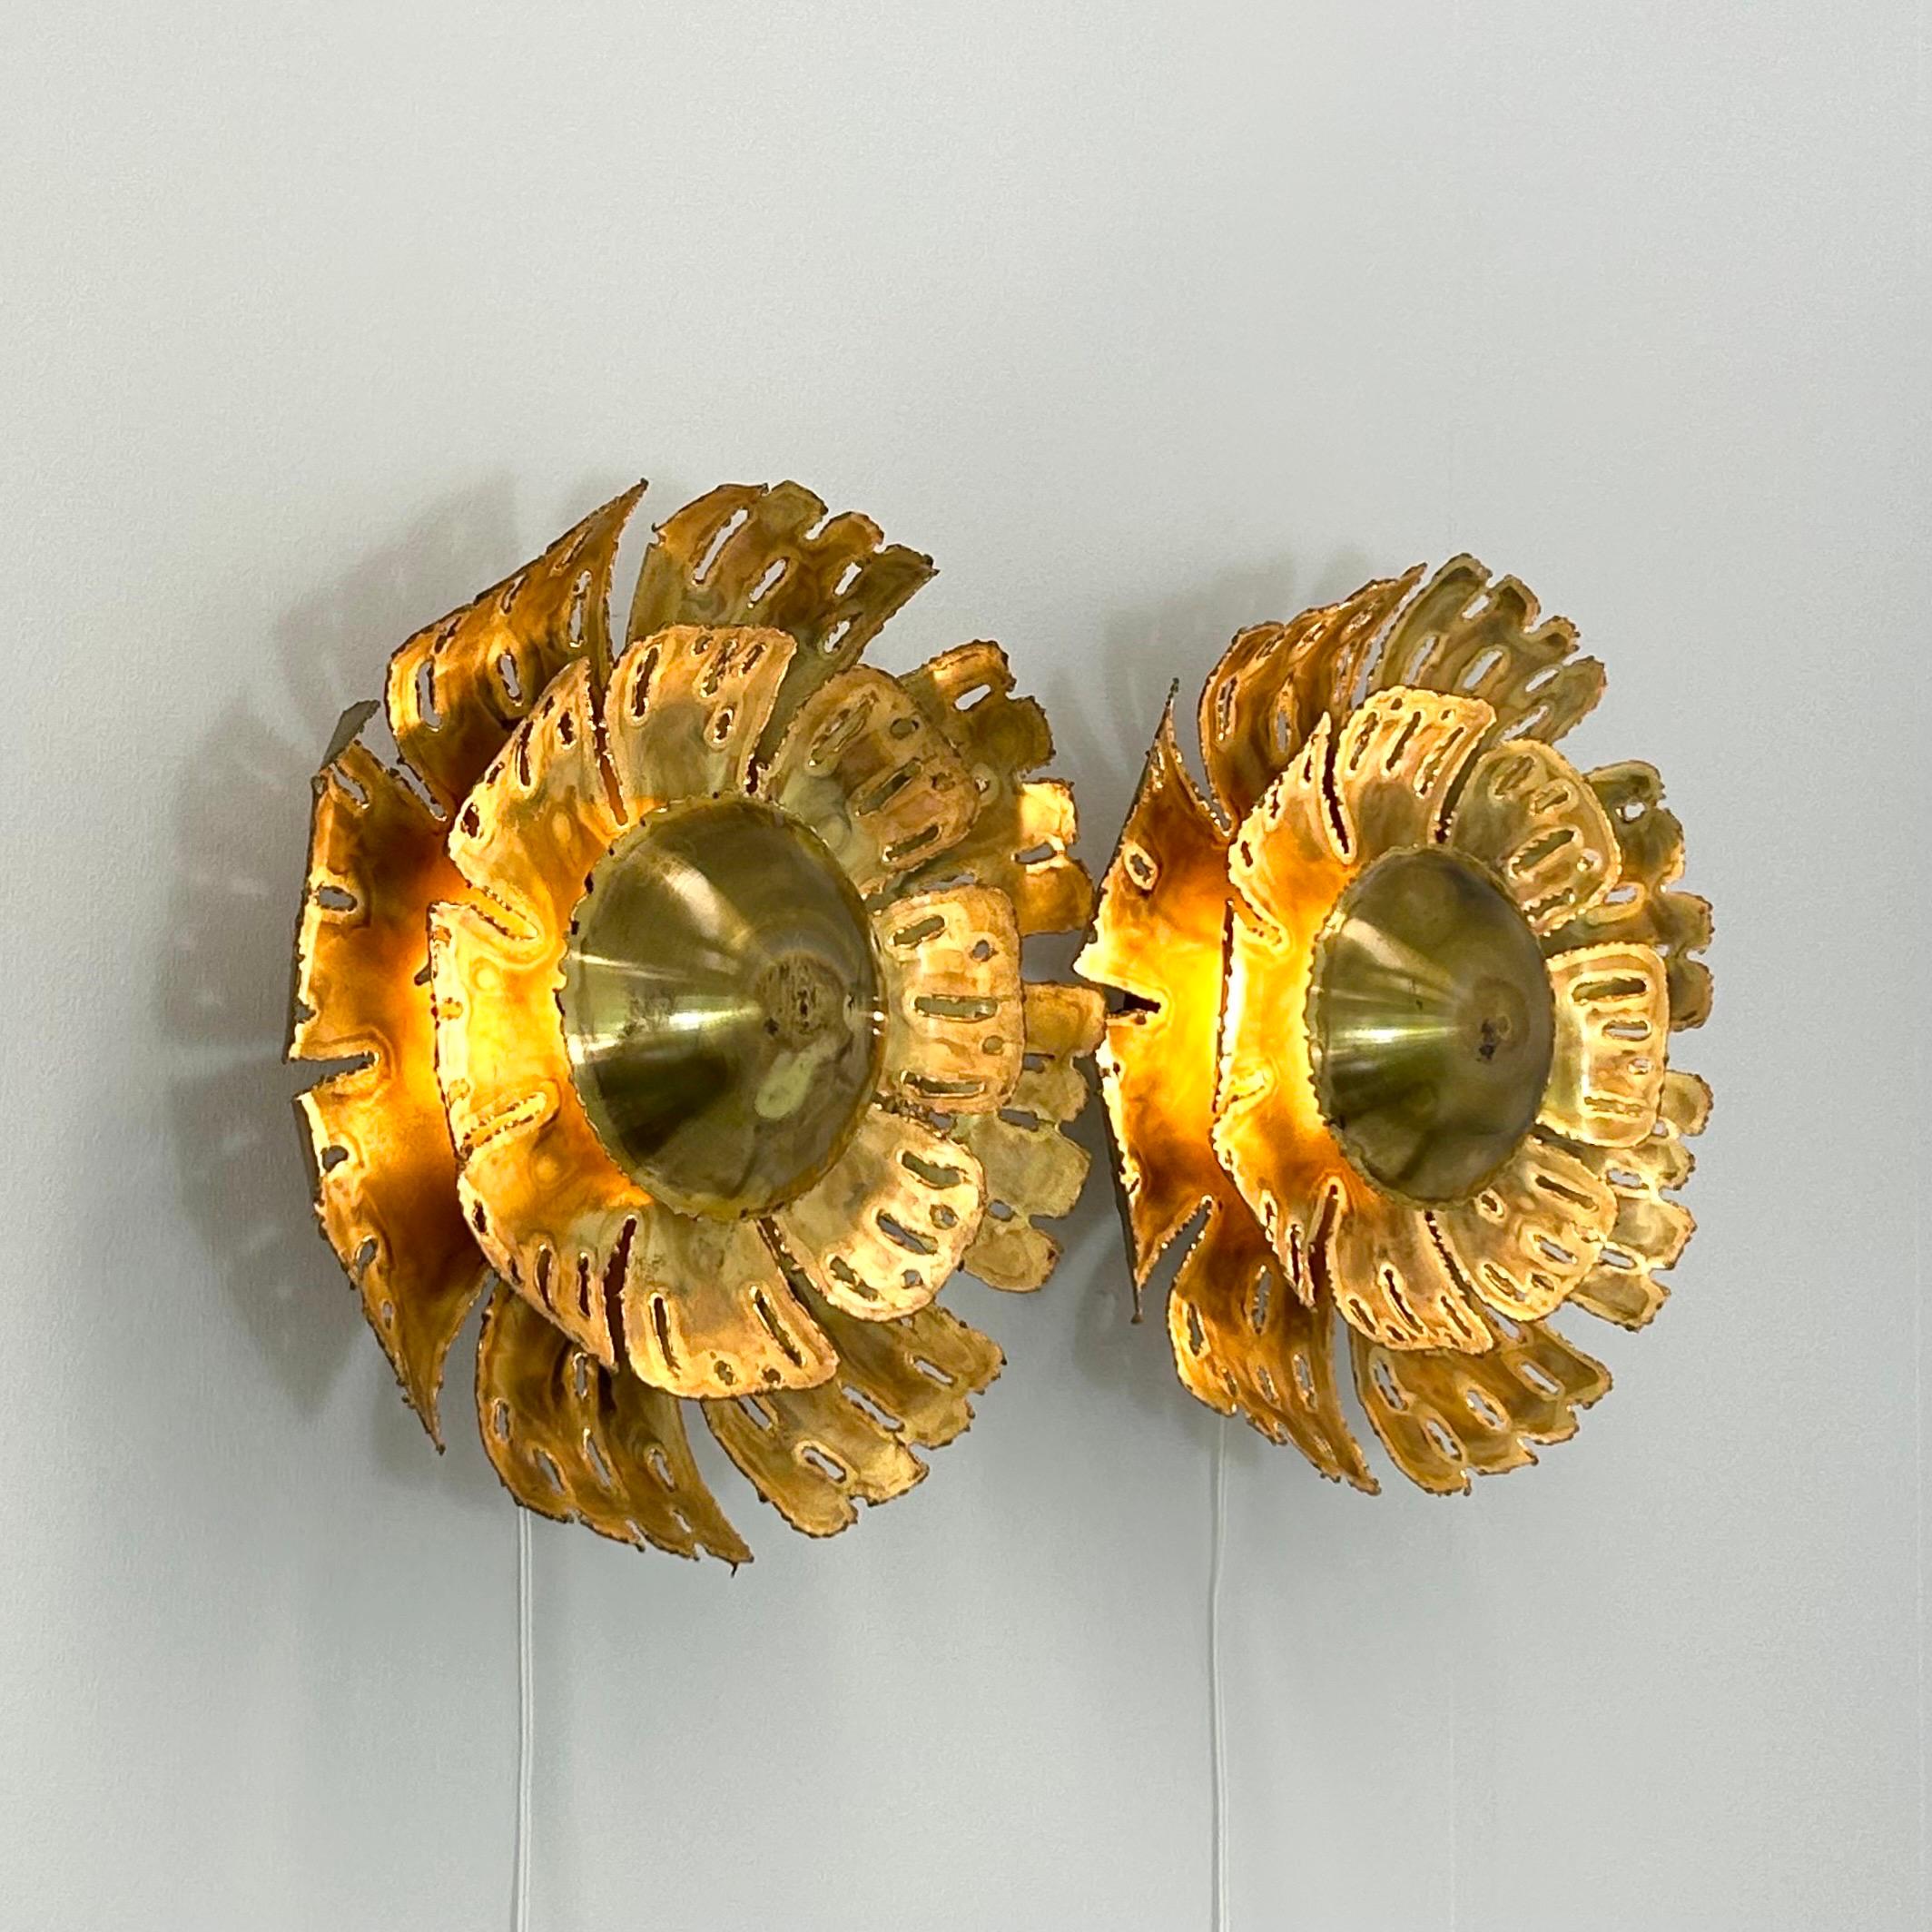 Brutalist Pair of Large Brass Wall Lamps by Svend Aage Holm Sorensen, 1960s, Denmark For Sale